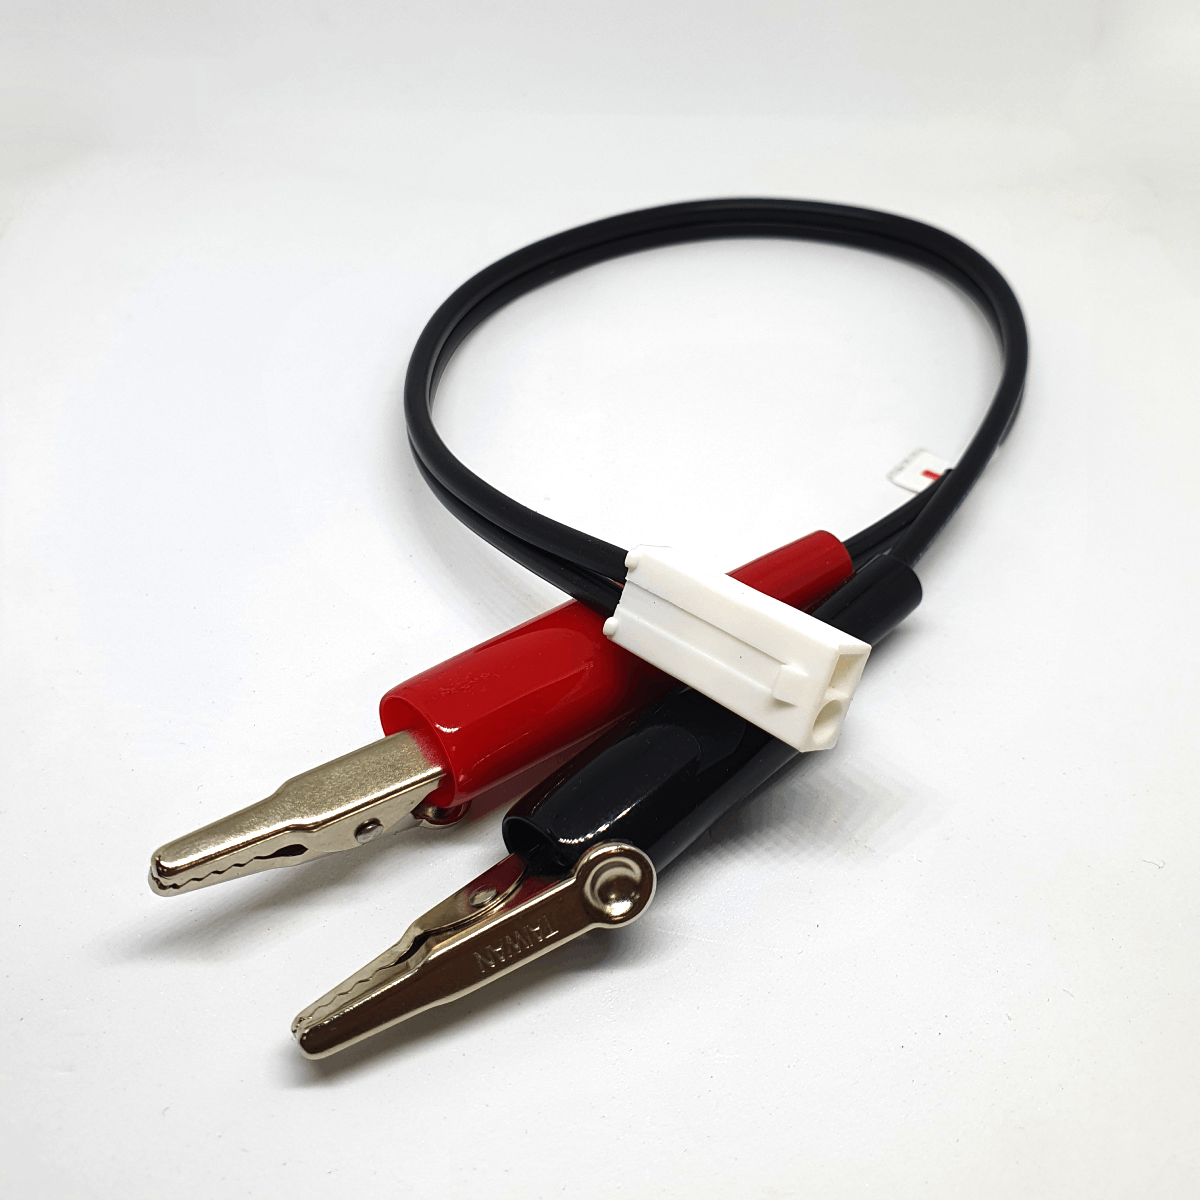 Alligator clip) battery charging system quick wiring